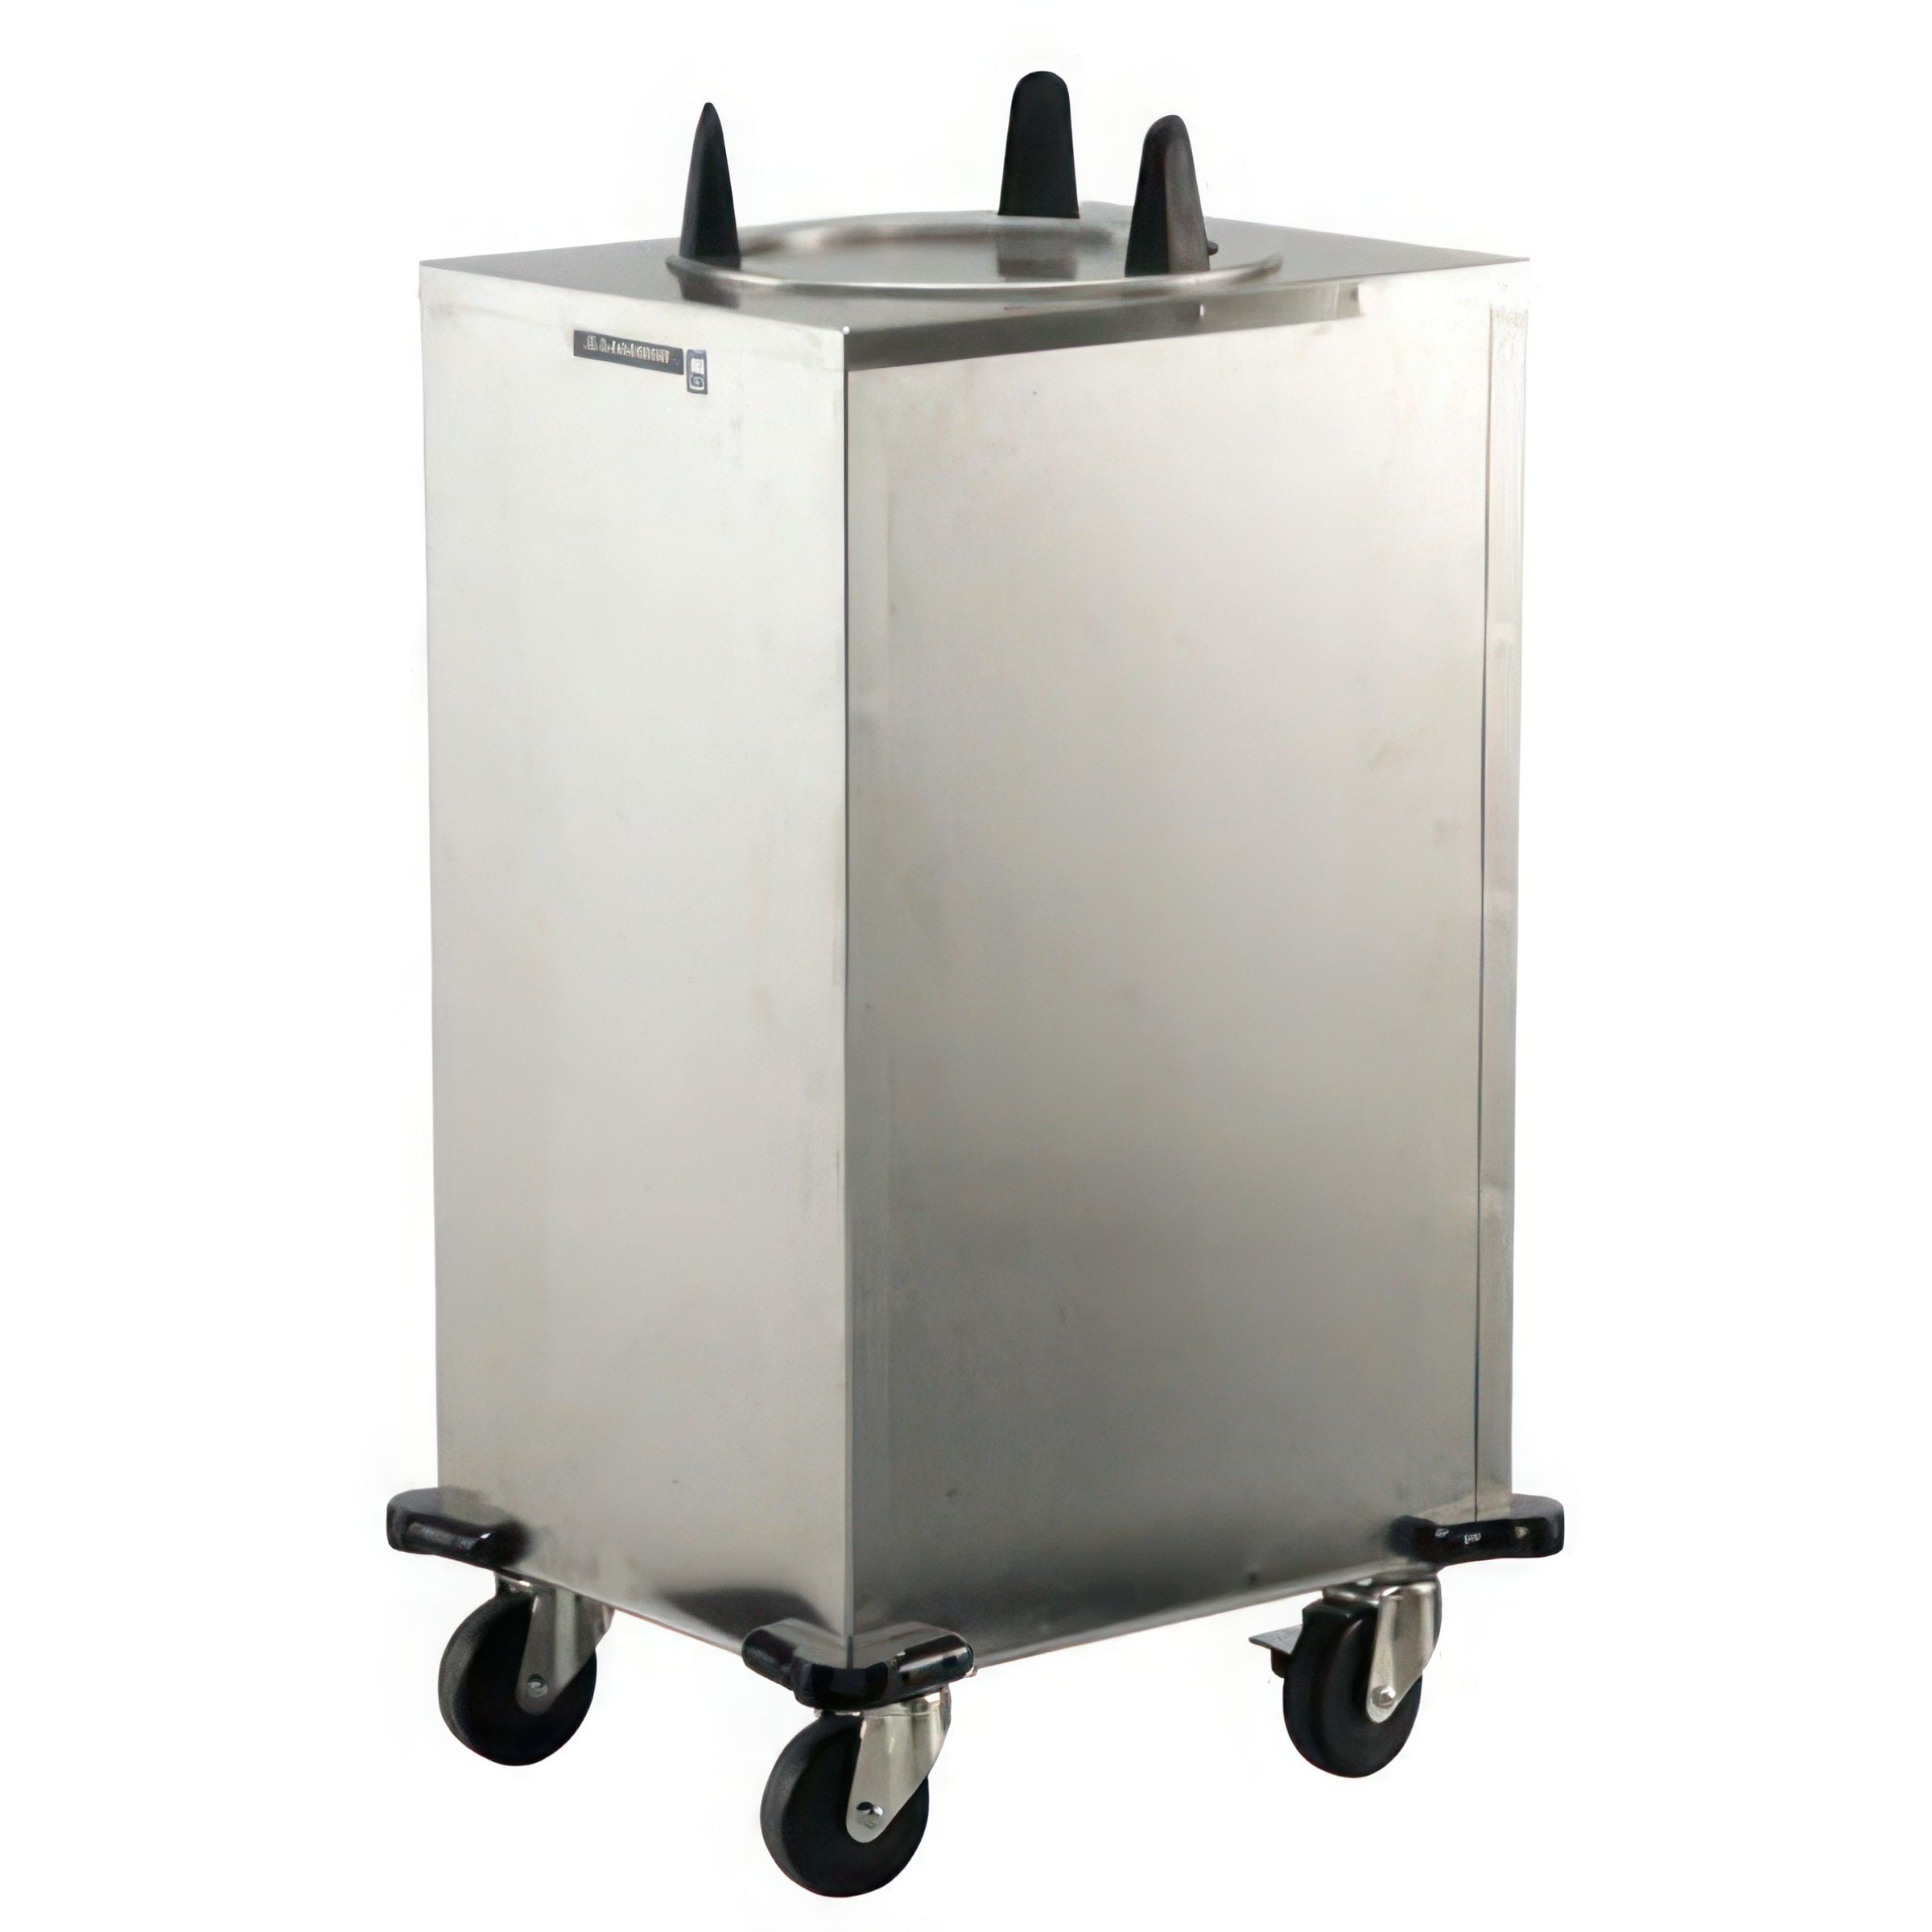 Lakeside 772 Mobile Plate Dispenser, Non-Heated, Adjust-a-Fit